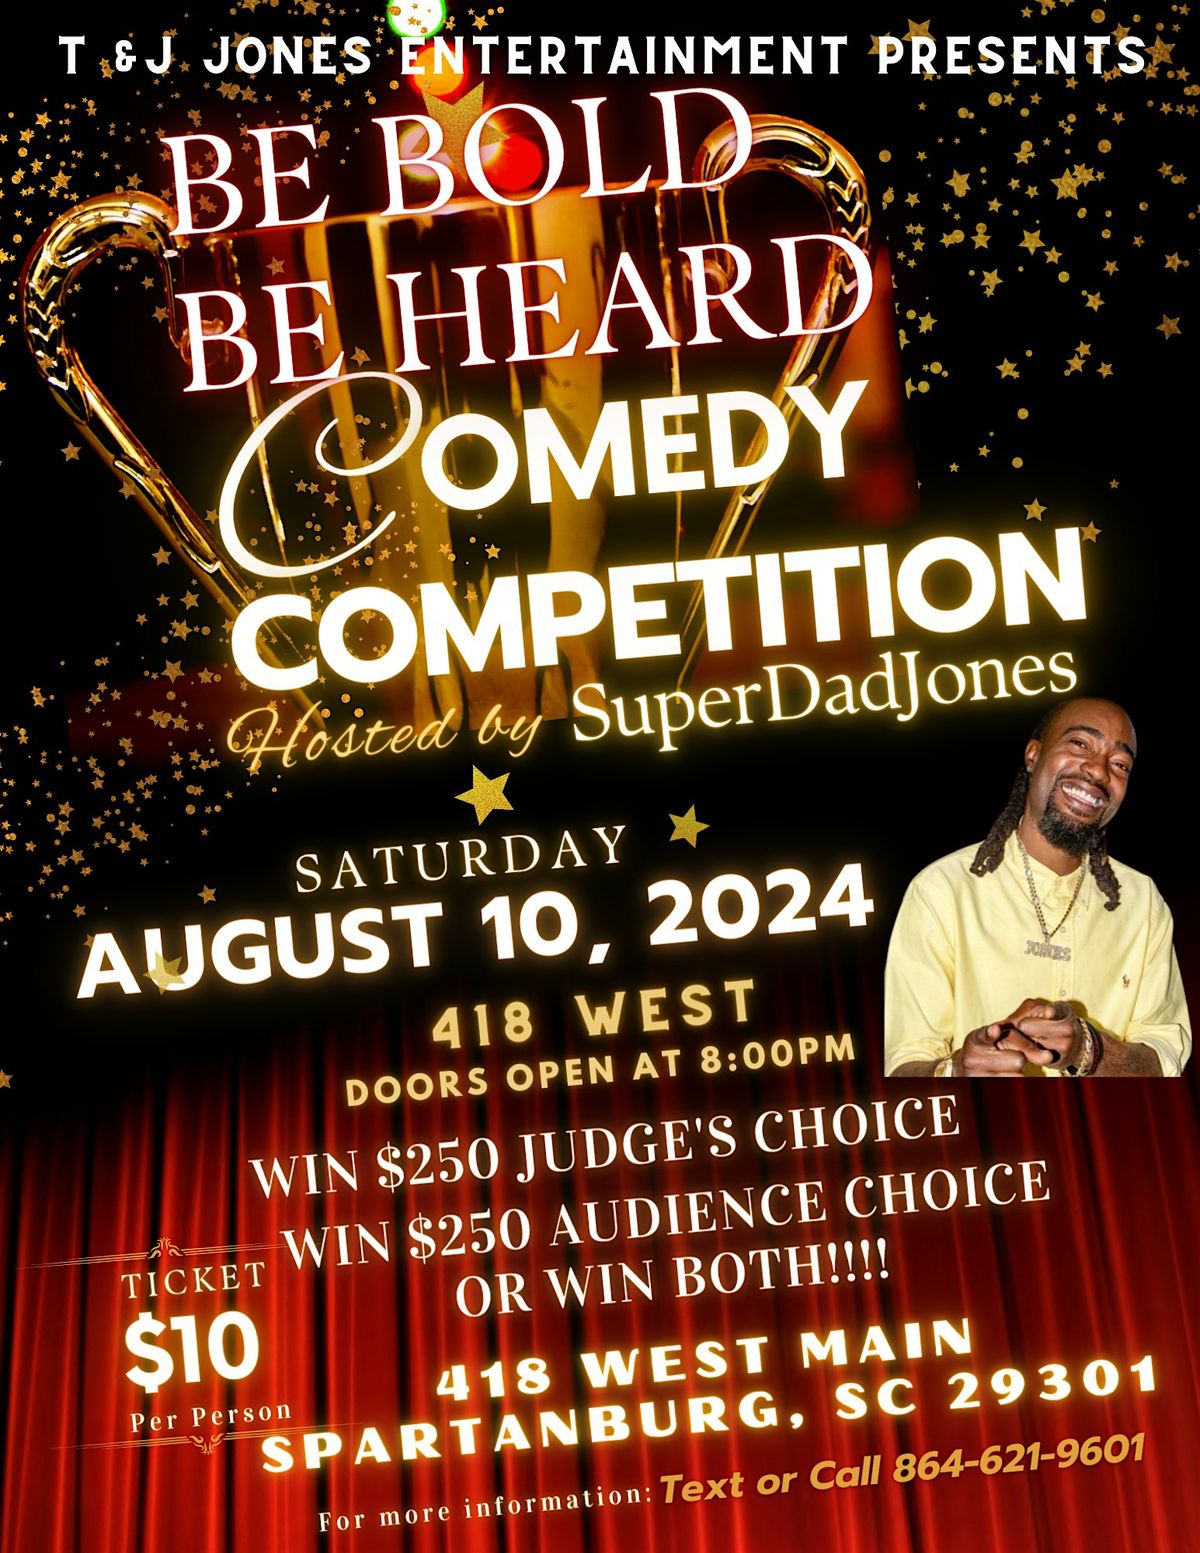 Be BOLD Be HEARD Comedy COMPETITION